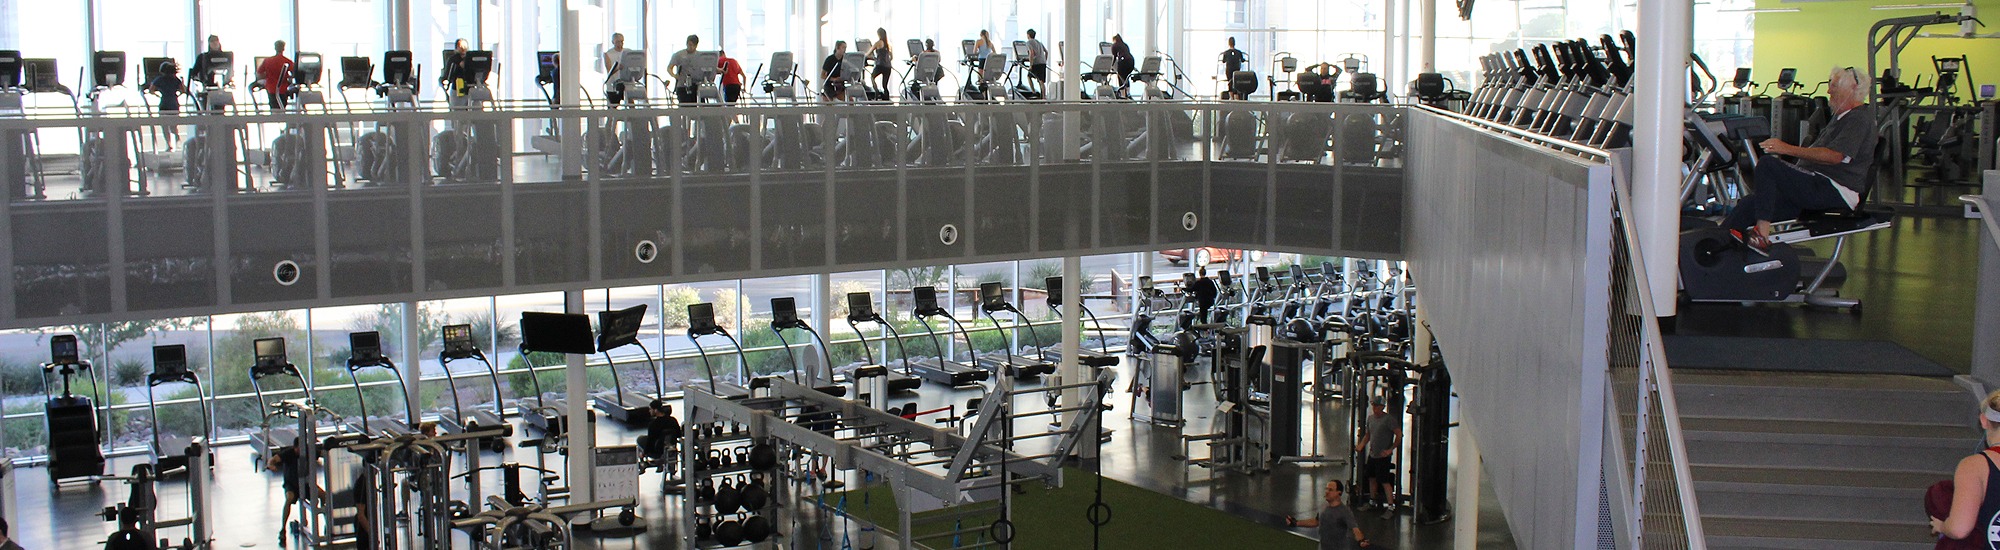 Second floor view of the Fitness Center, treadmills, ehlipticals and spinners being used